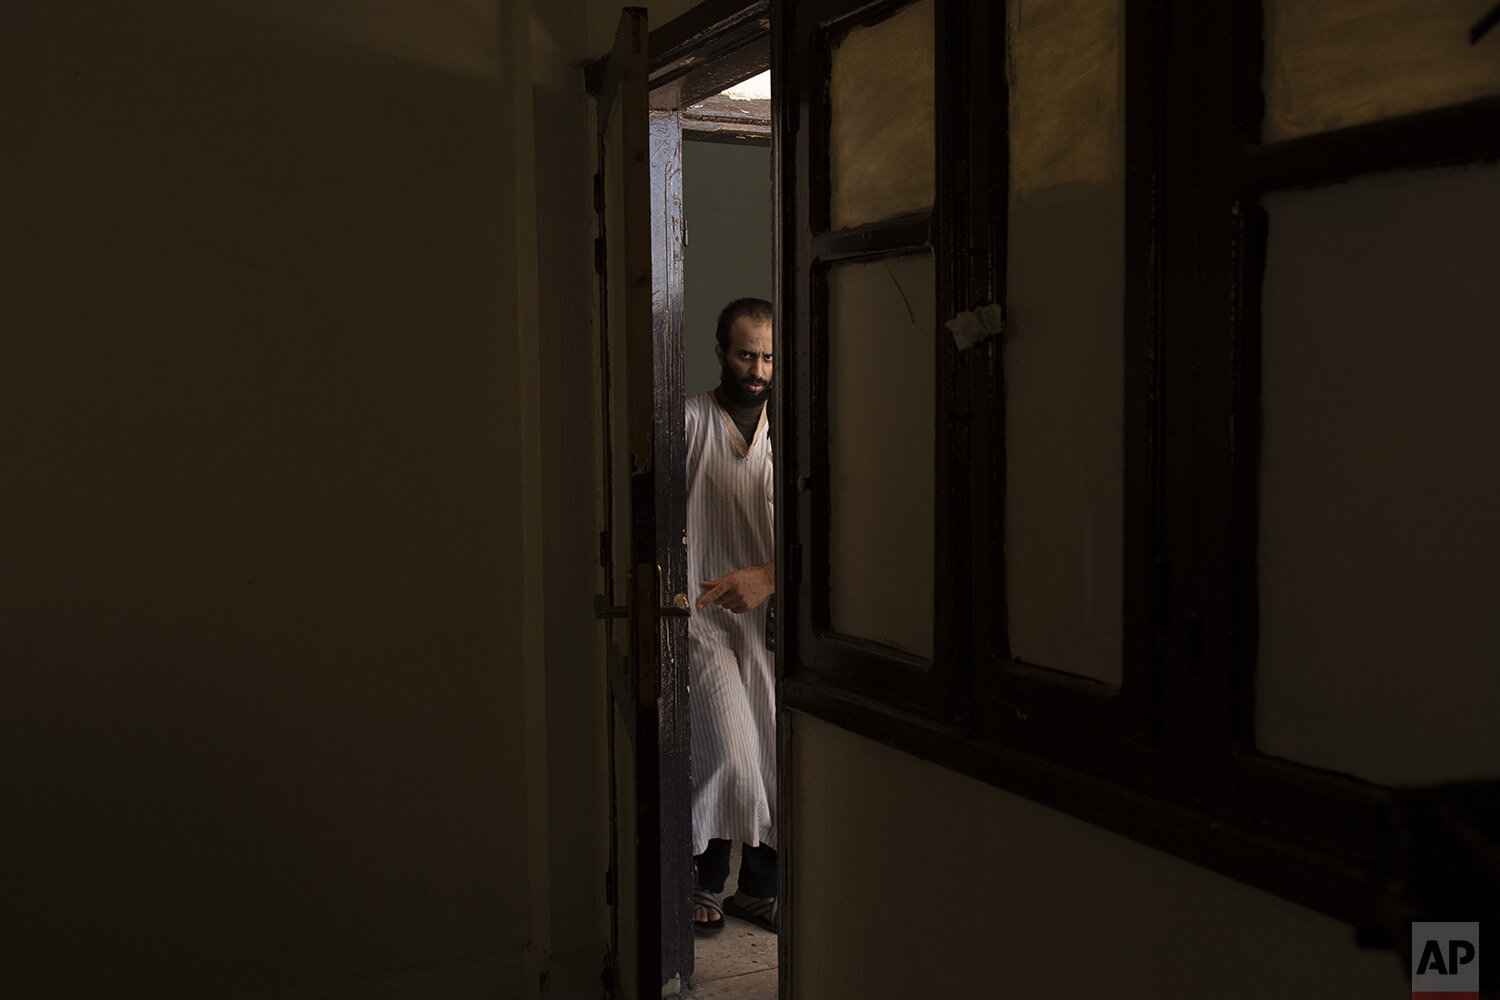  In this Sept. 4, 2019, photo, Abdul-Rahman al-Shmary, a 24-year old Saudi Islamic State member who traded in Yazidi slaves and has been in a Syrian Kurdish-run prison since 2017, is led by guards to an interview in Rmeilan, northeast Syria. He dismi